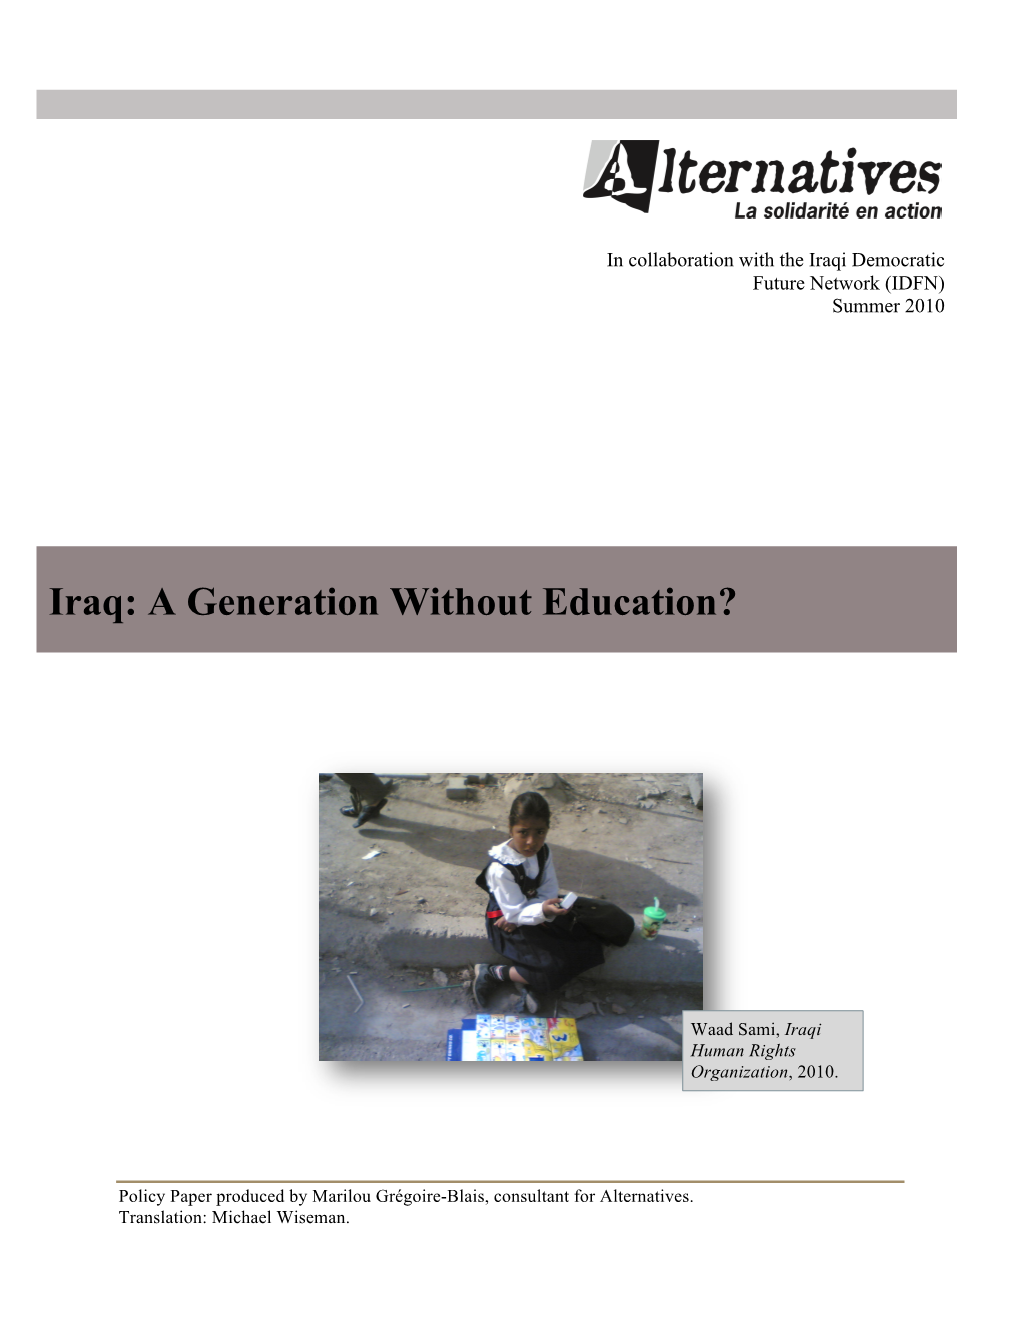 Iraq: a Generation Without Education?